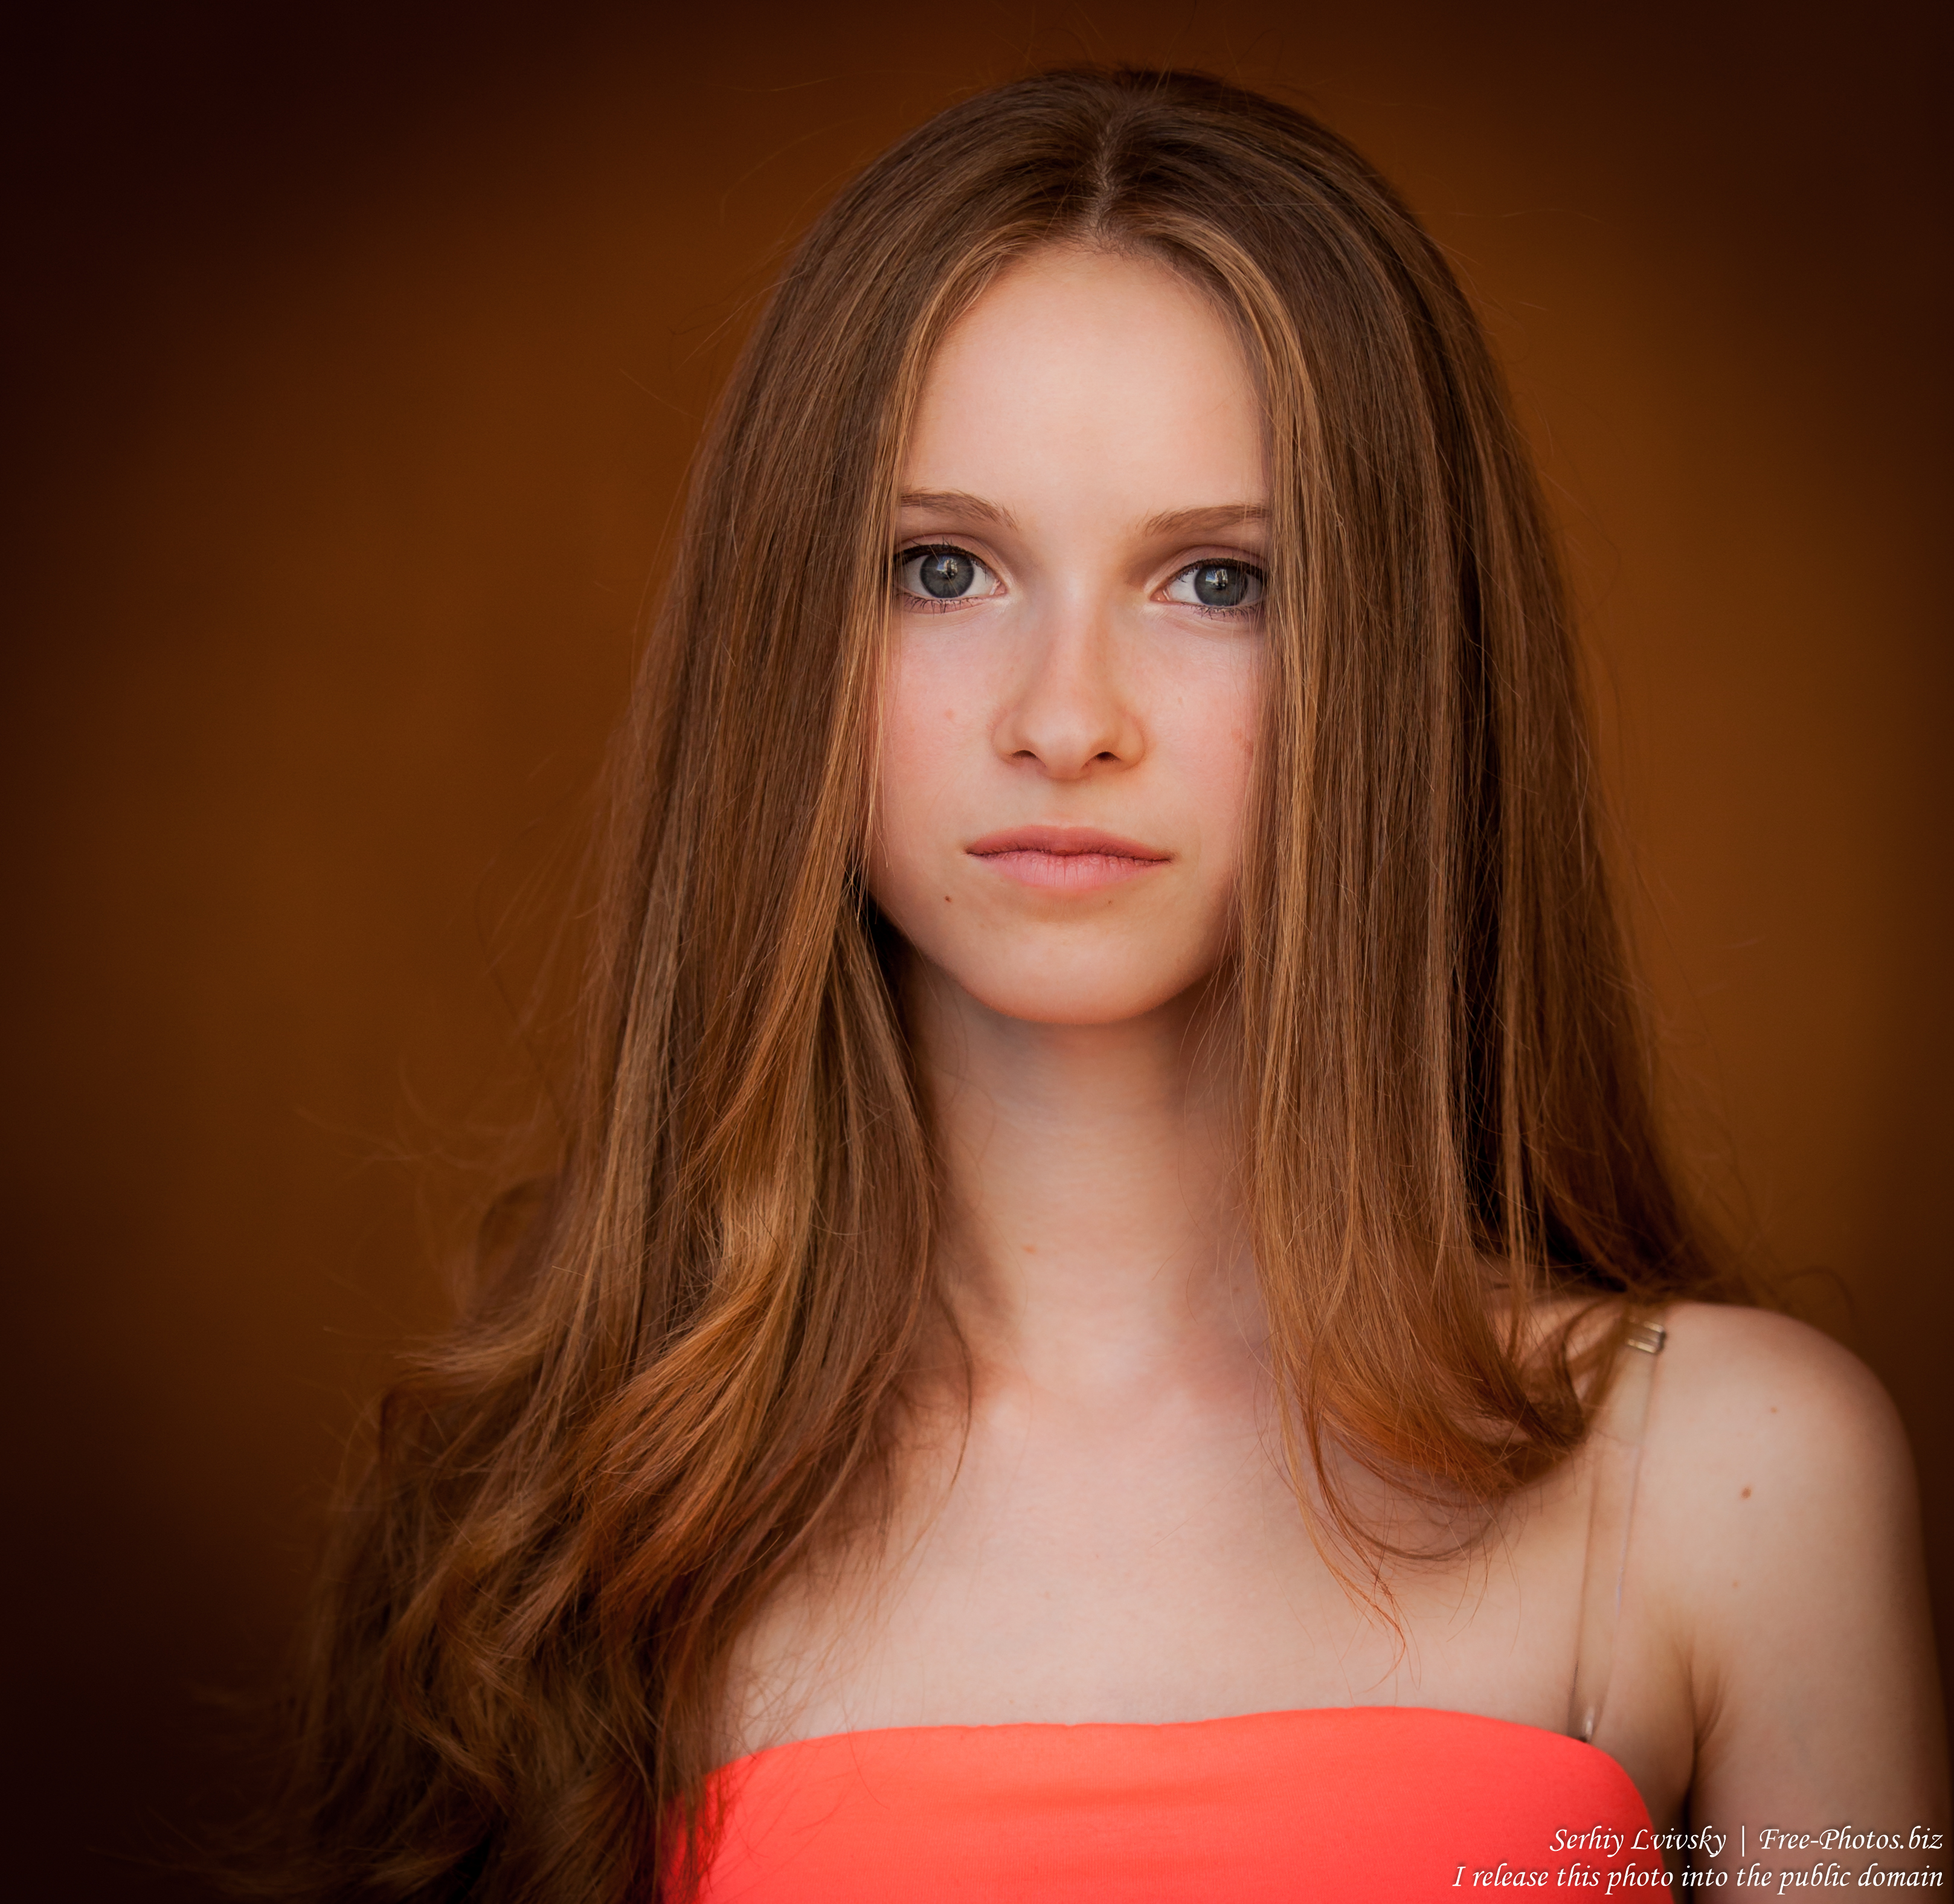 a 16-year-old girl photographed in August 2015 by Serhiy Lvivsky, picture 1